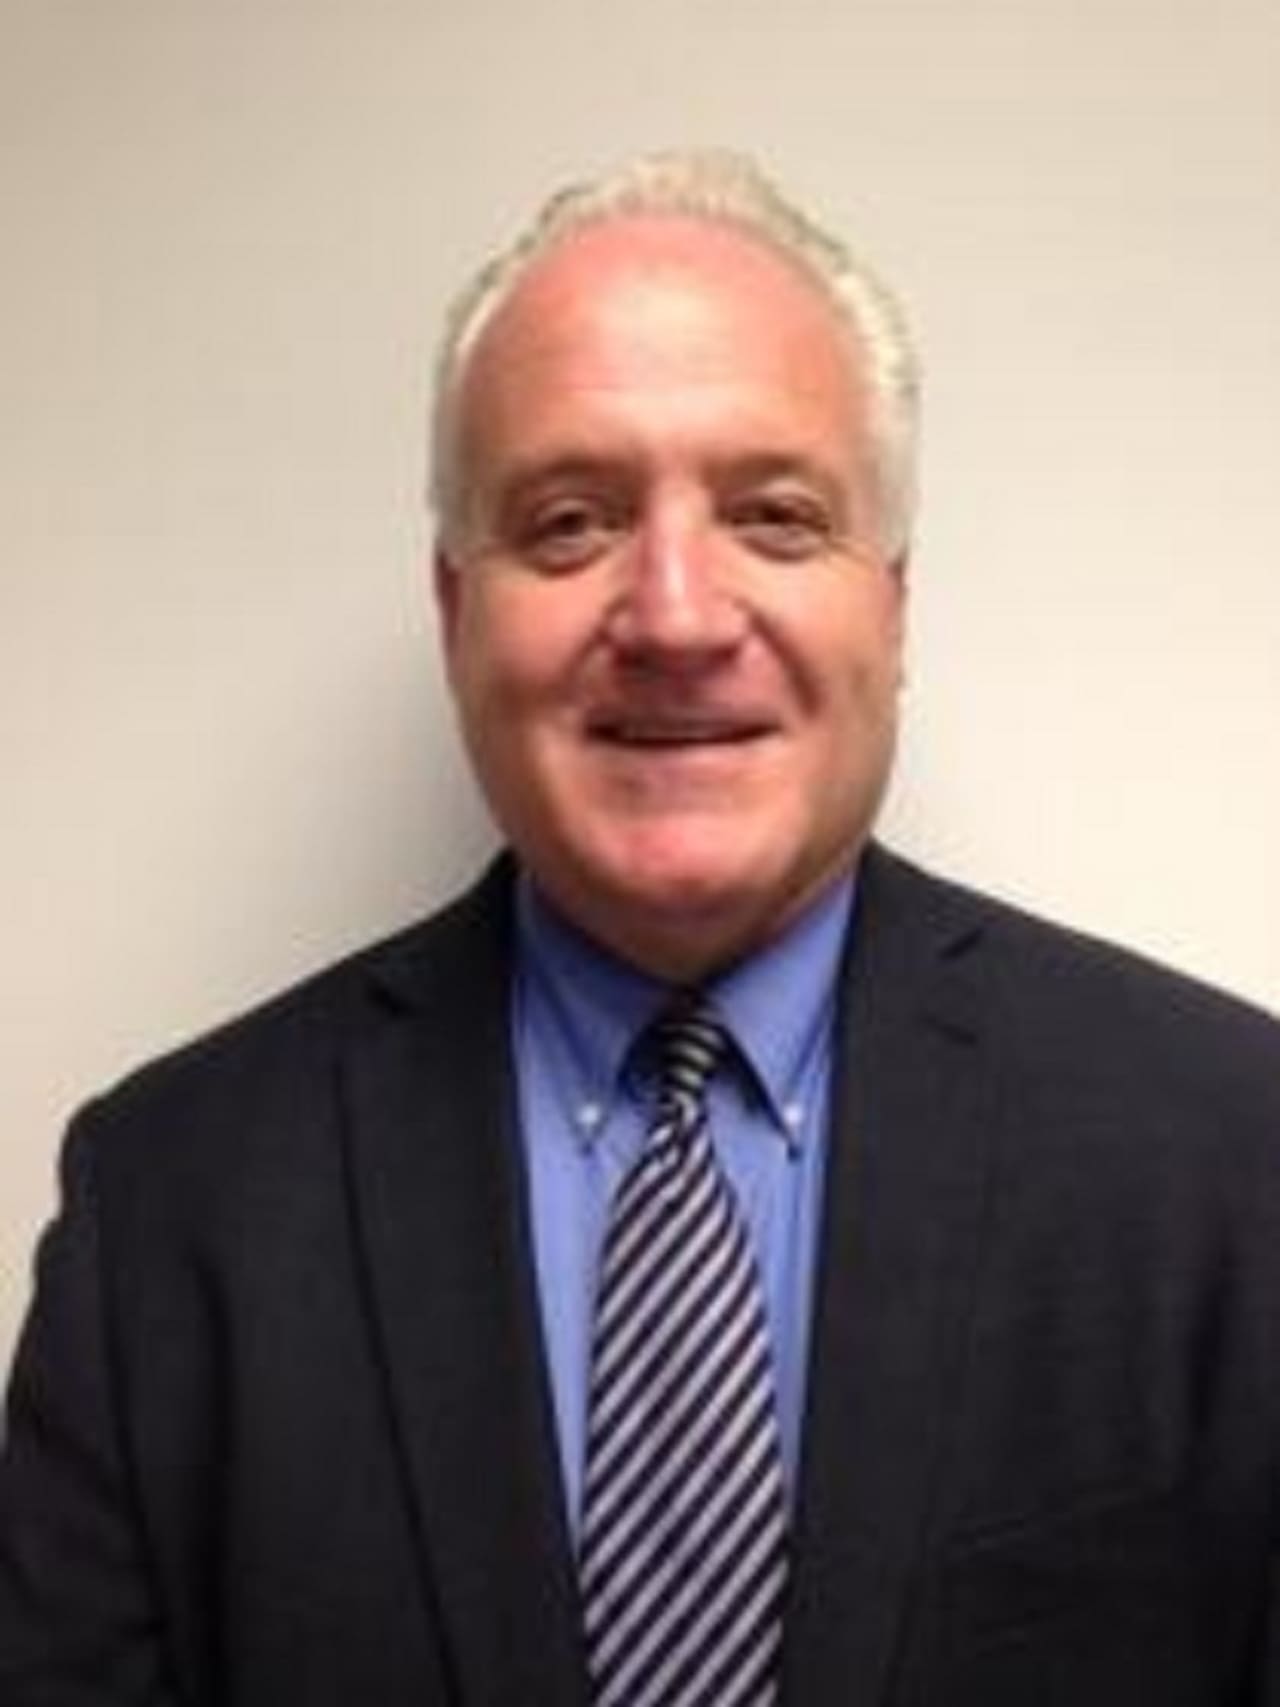 Timothy P. Leddy is the new President and CEO of the Westchester Visiting Nurse Services Group.